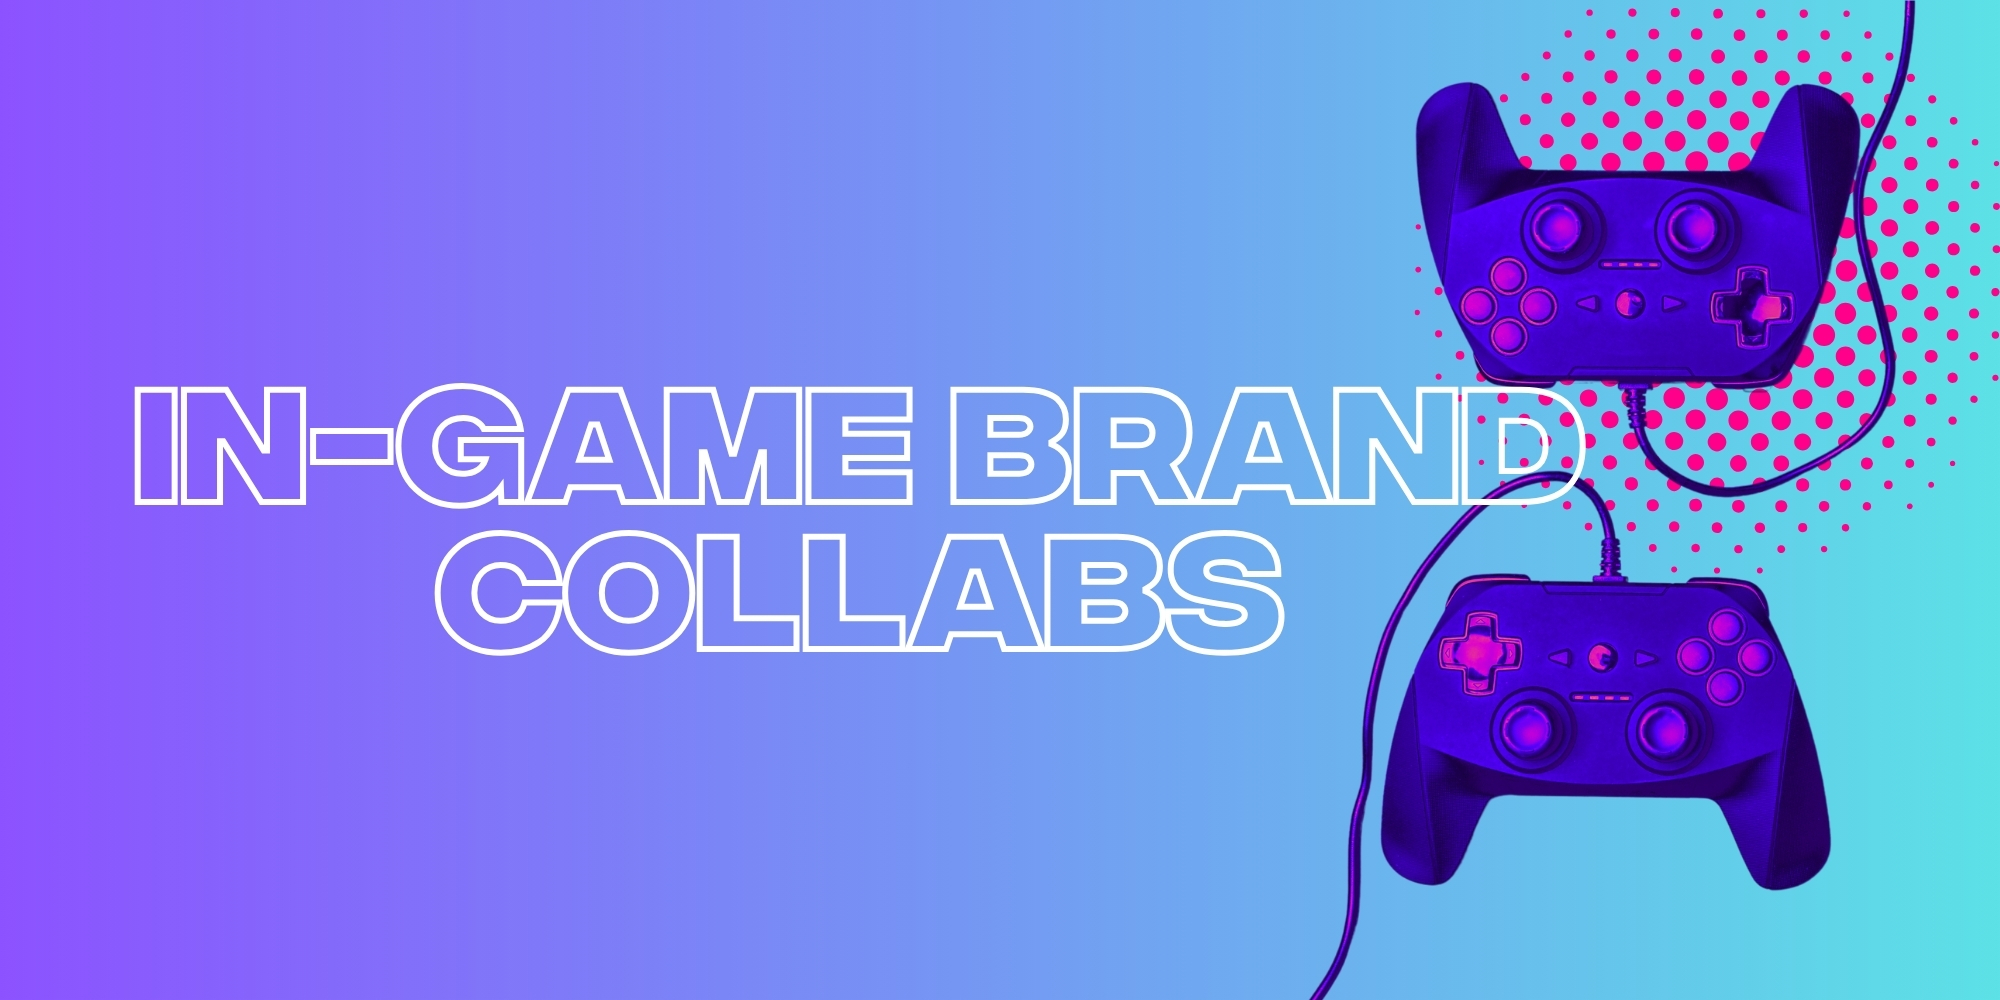 Here’s How To Succeed With In-Game Brand Collaborations